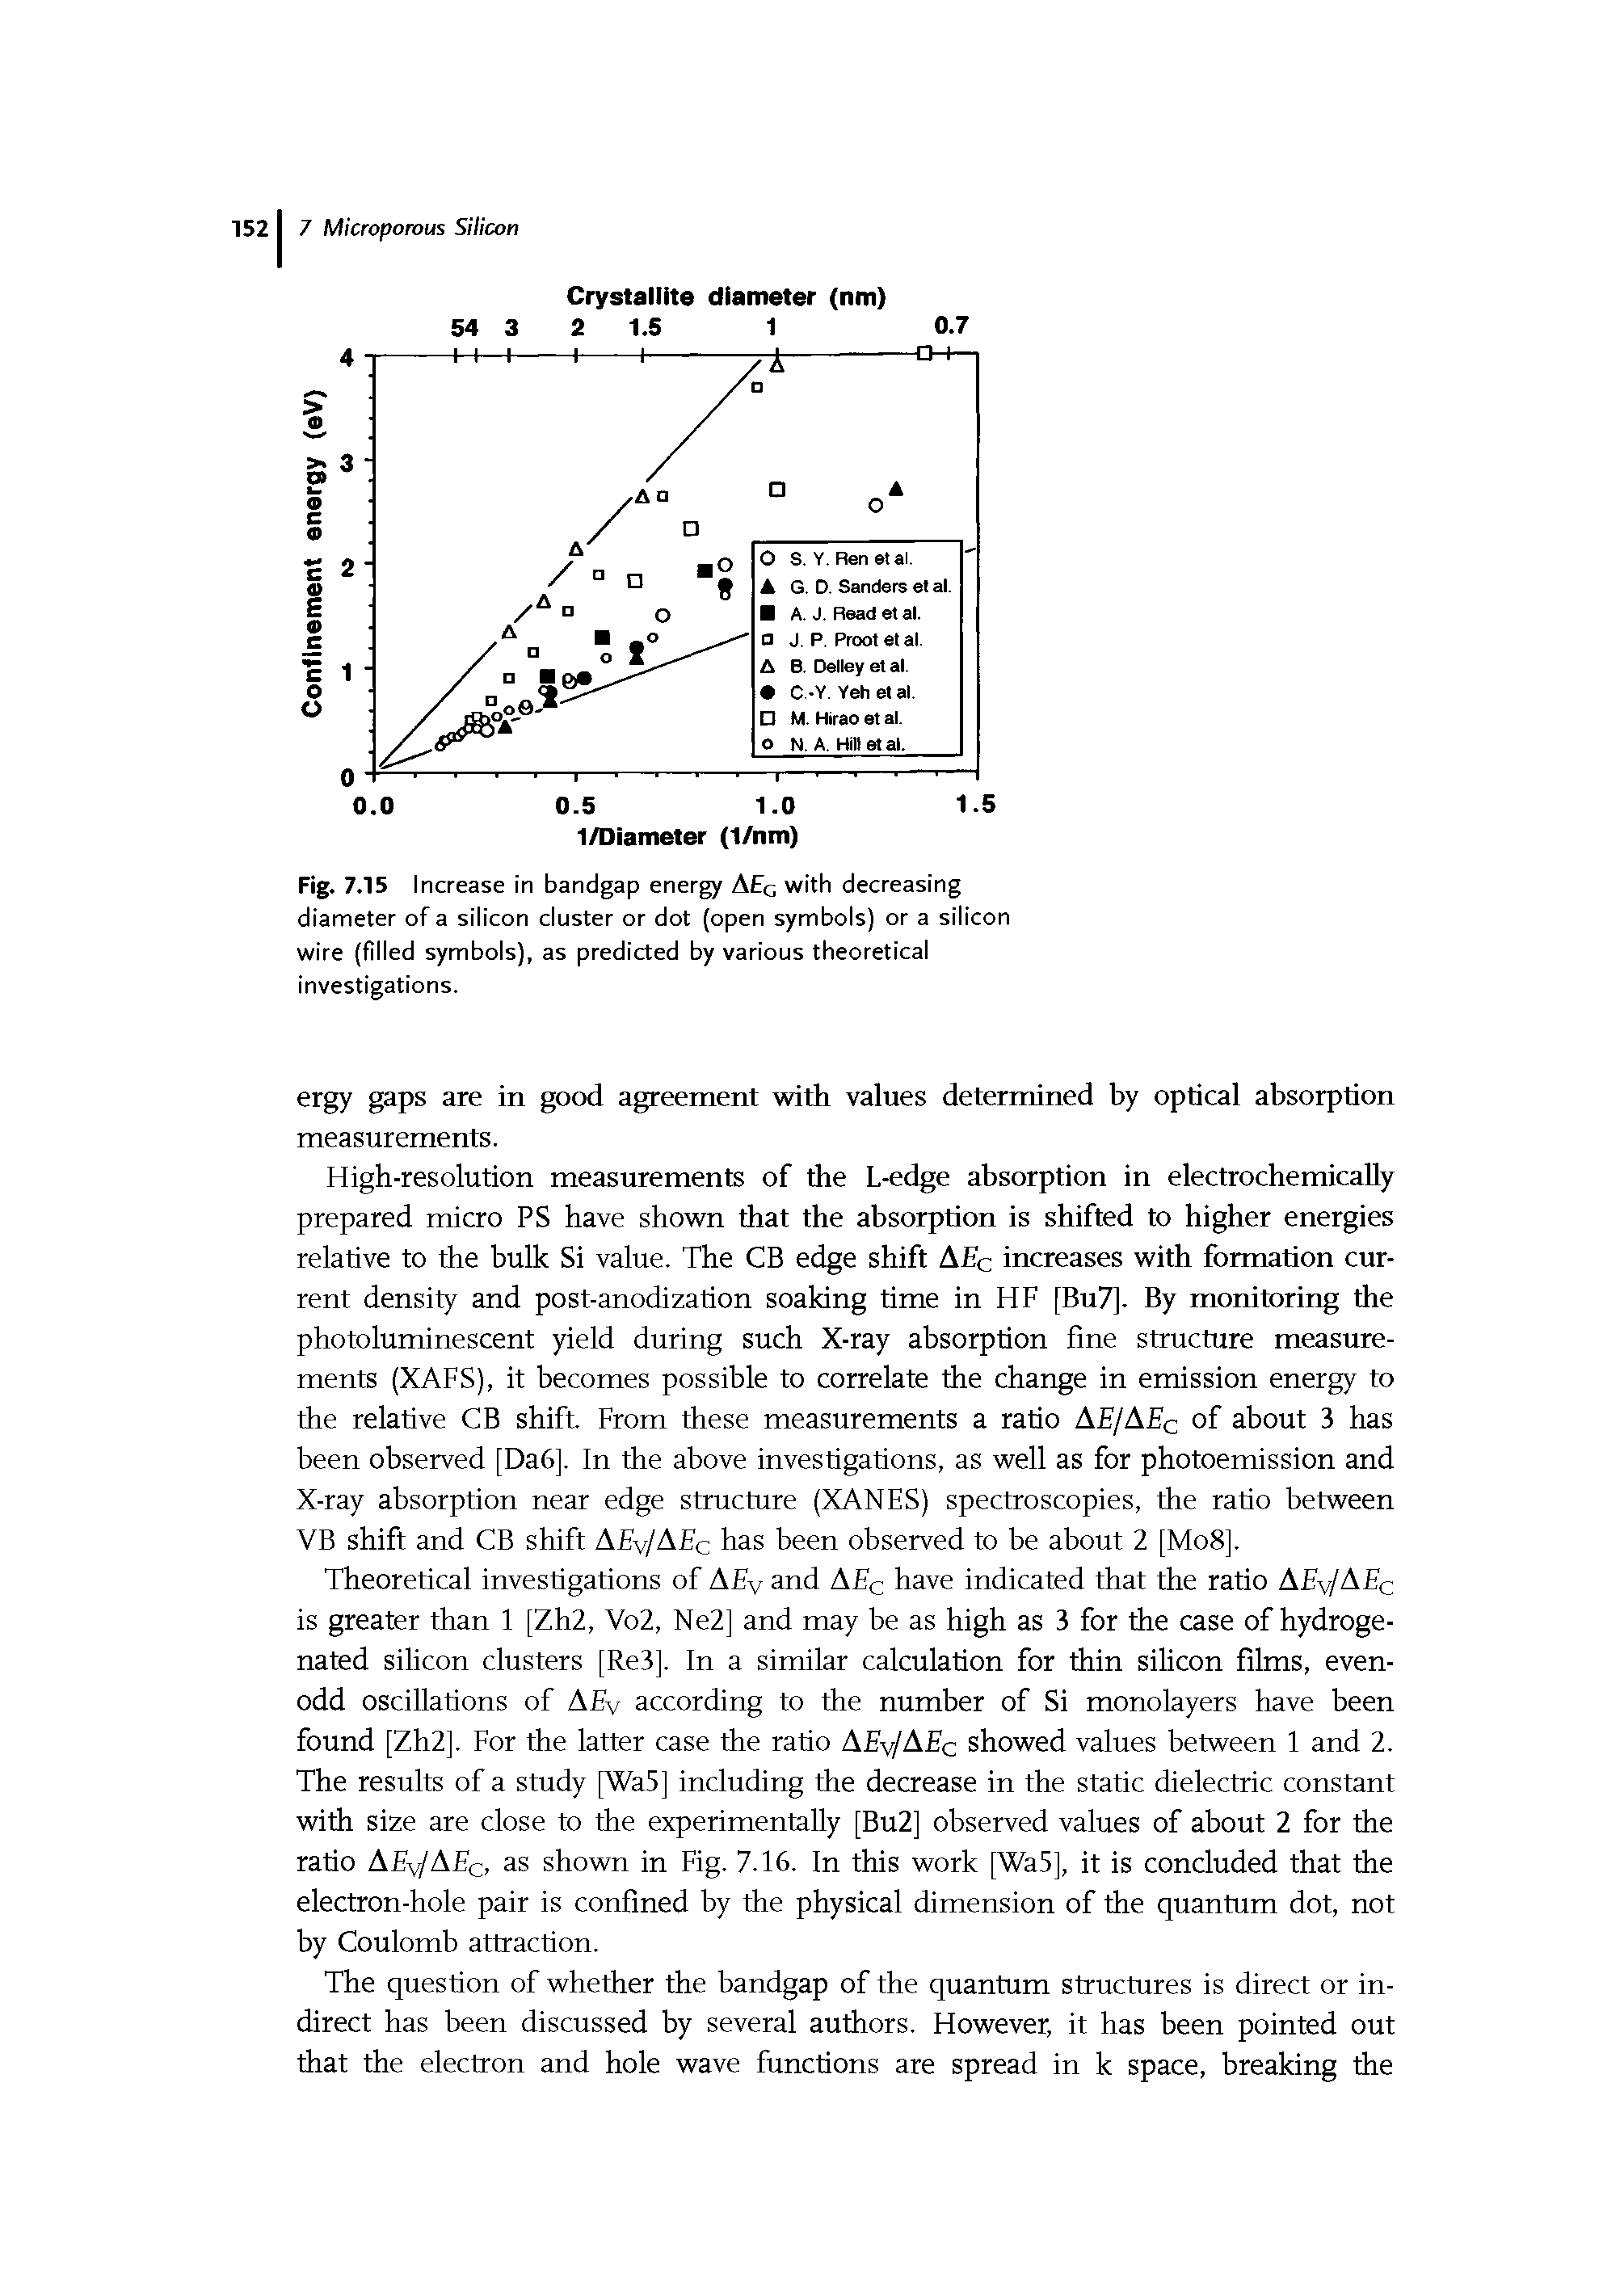 Fig. 7.15 I ncrease in bandgap energy AEc with decreasing diameter of a silicon cluster or dot (open symbols) or a silicon wire (filled symbols), as predicted by various theoretical investigations.